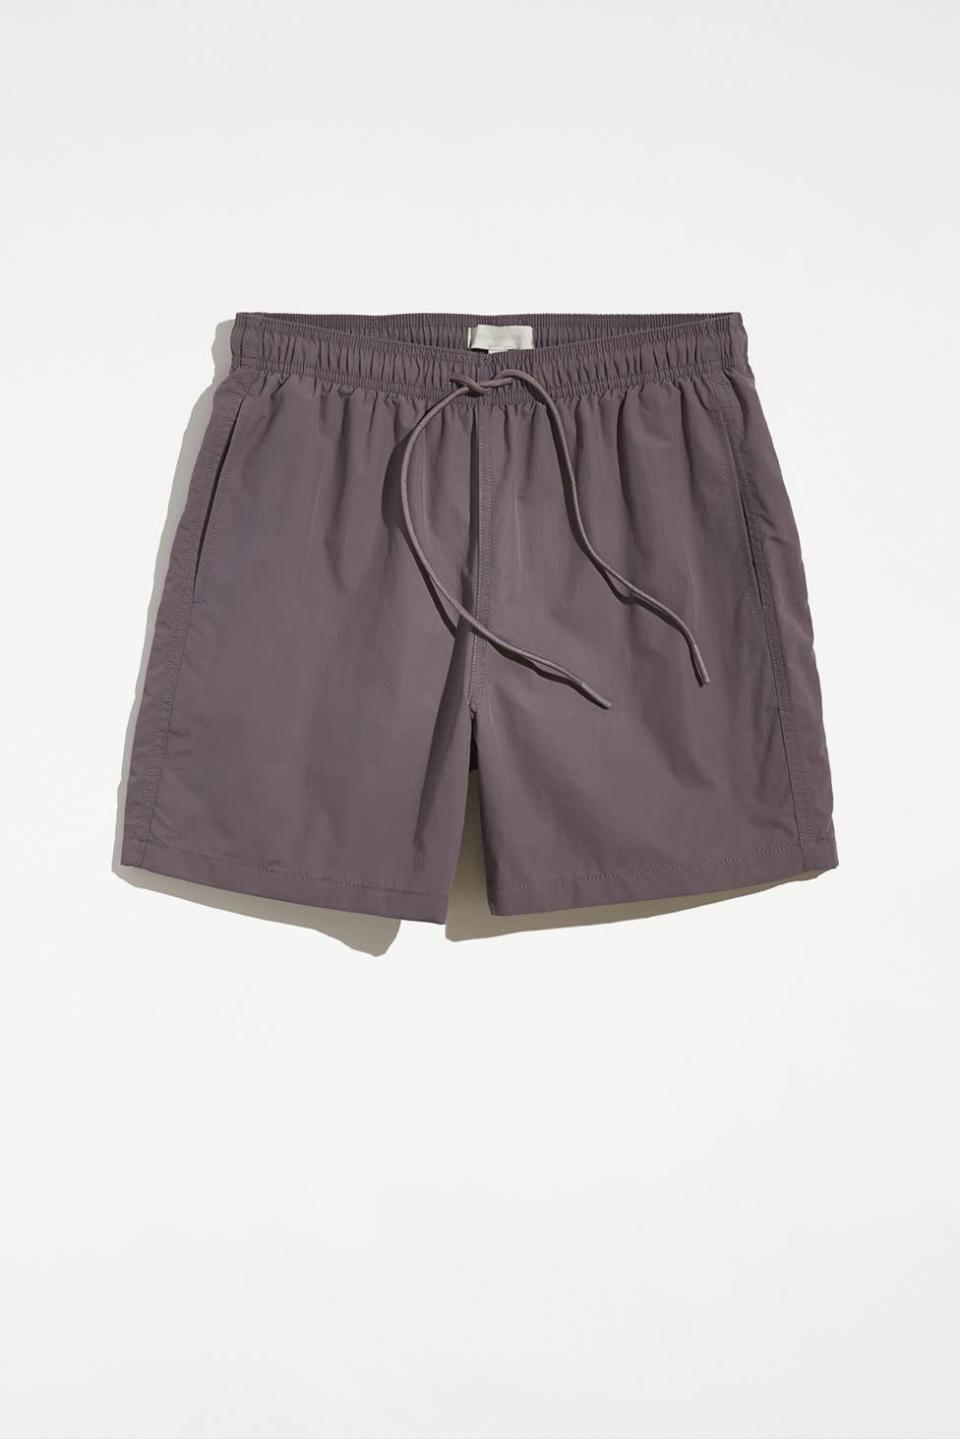 <p><strong>Standard Cloth</strong></p><p>urbanoutfitters.com</p><p><strong>$35.00</strong></p><p><a href="https://go.redirectingat.com?id=74968X1596630&url=https%3A%2F%2Fwww.urbanoutfitters.com%2Fshop%2Fstandard-cloth-oliver-5-nylon-short&sref=https%3A%2F%2Fwww.esquire.com%2Fstyle%2Fmens-fashion%2Fadvice%2Fg3307%2Fbest-shorts-spring-summer%2F" rel="nofollow noopener" target="_blank" data-ylk="slk:Shop Now" class="link ">Shop Now</a></p><p>If the shorts you're reaching for this summer are slightly more cropped than the ones you've worn in the past, they're probably perfect. </p>